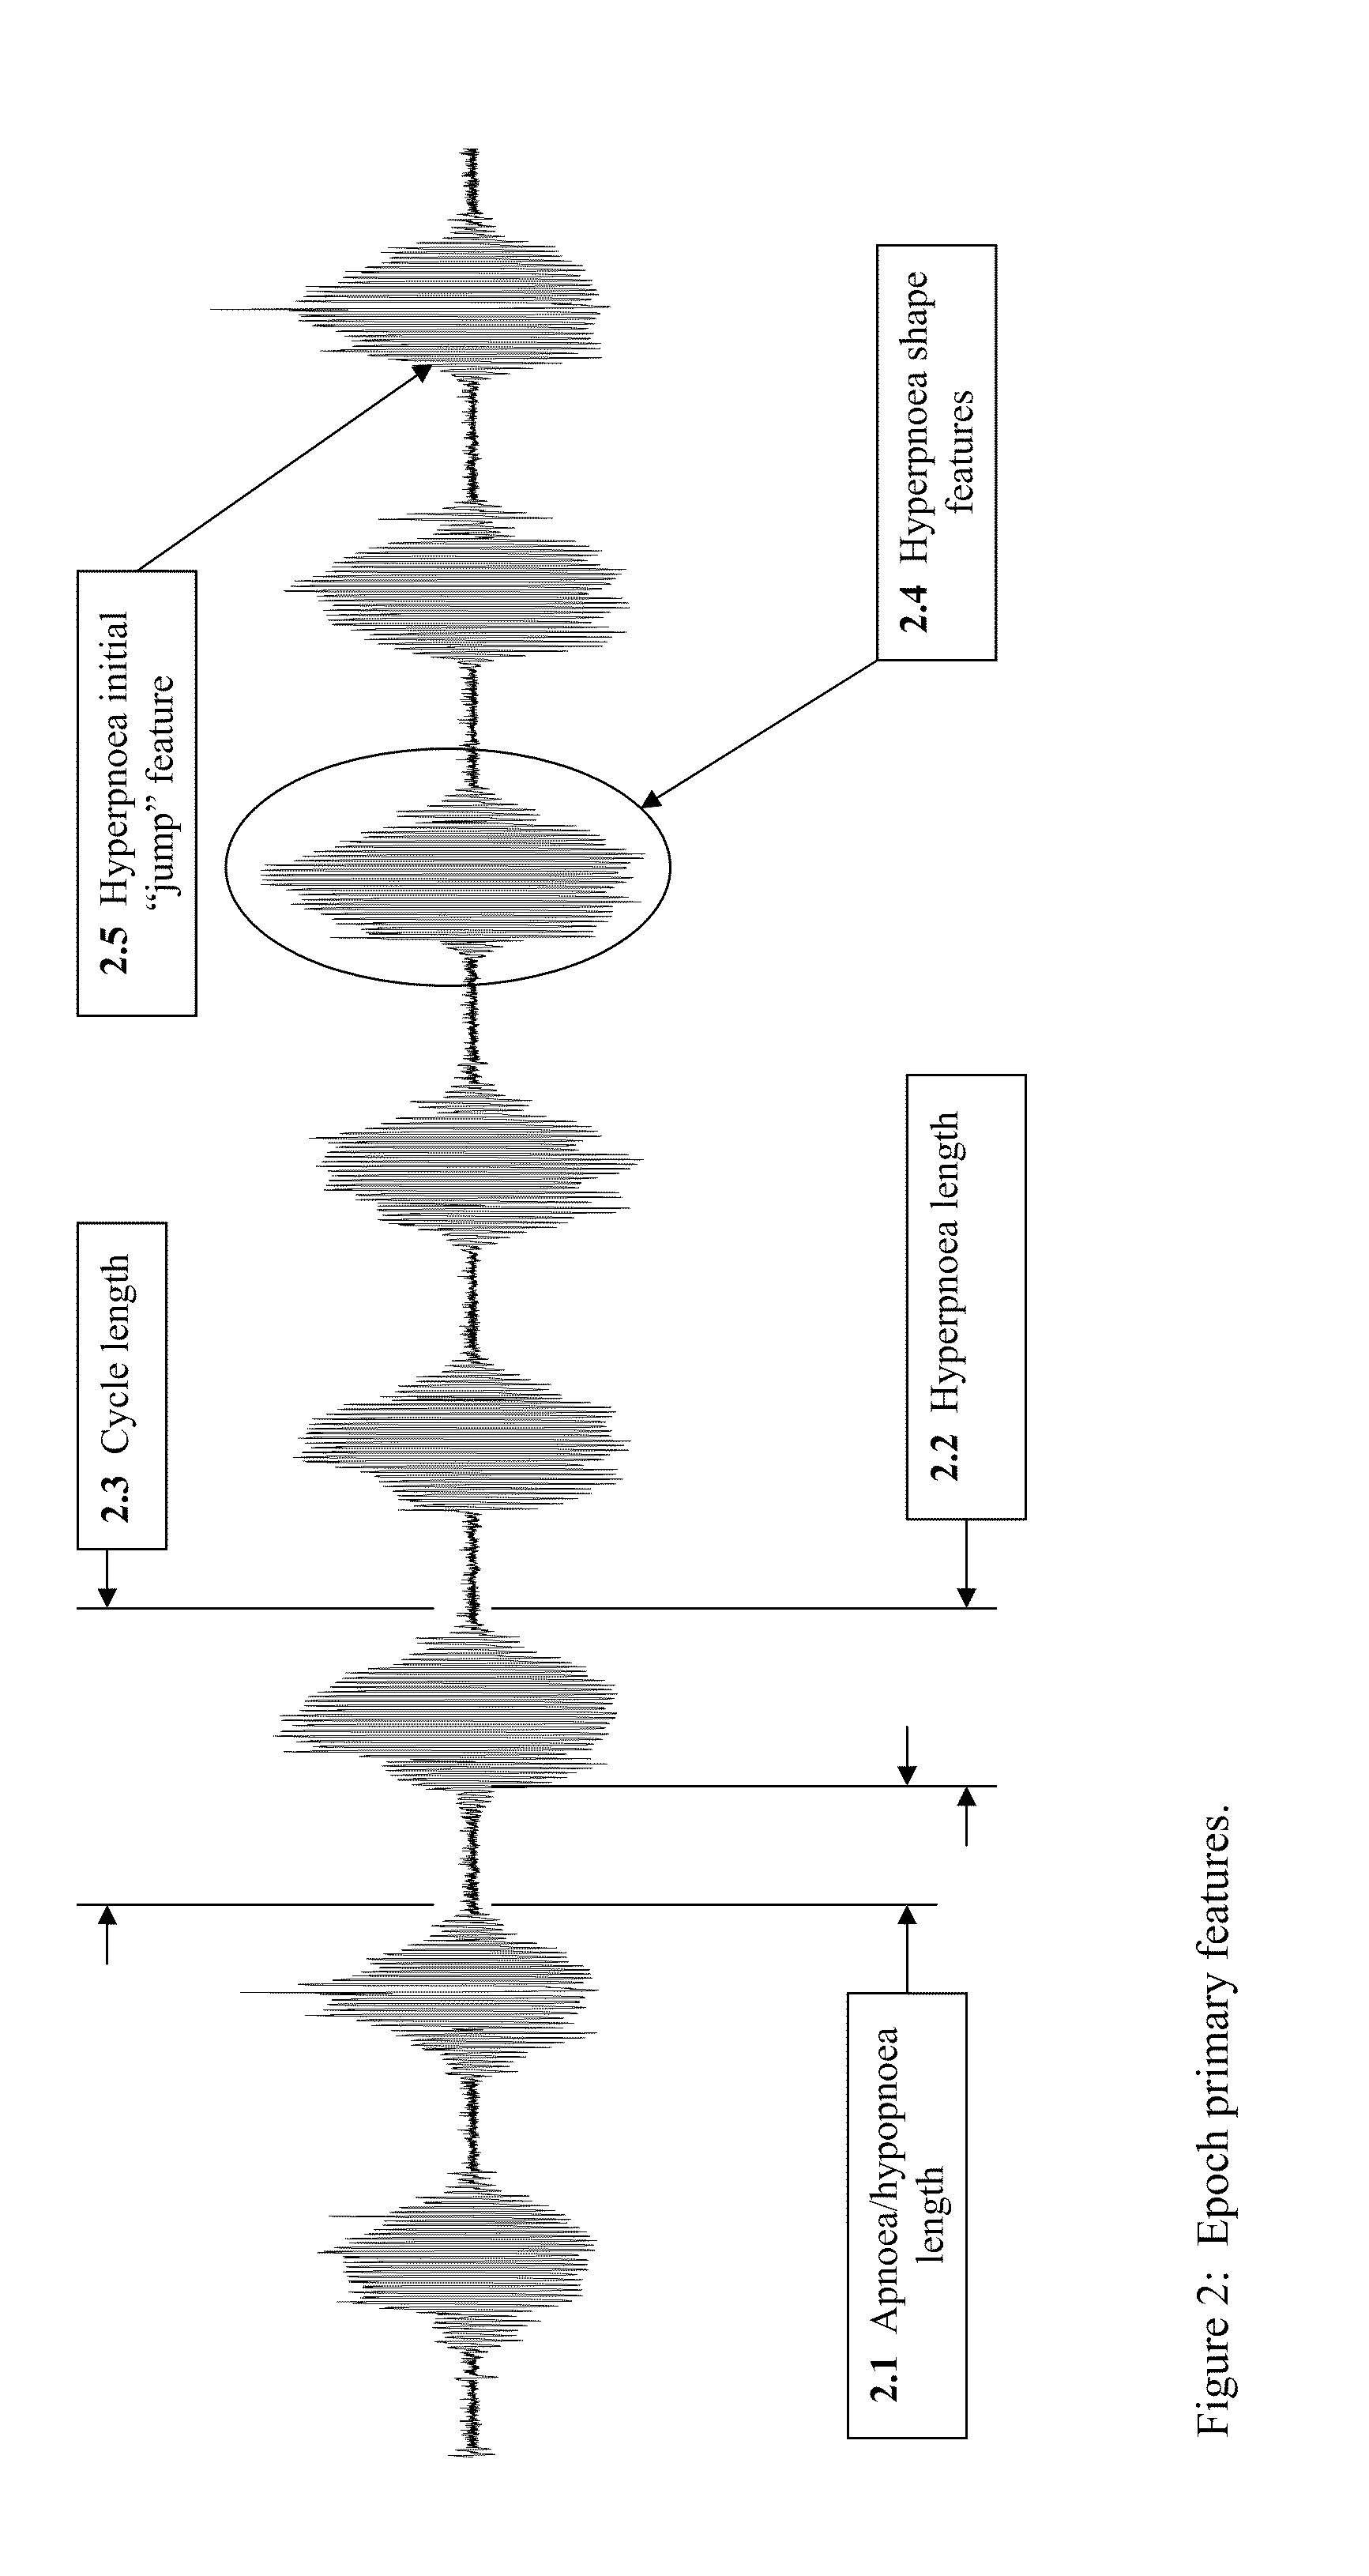 Method for detecting and discriminating breathing patterns from respiratory signals